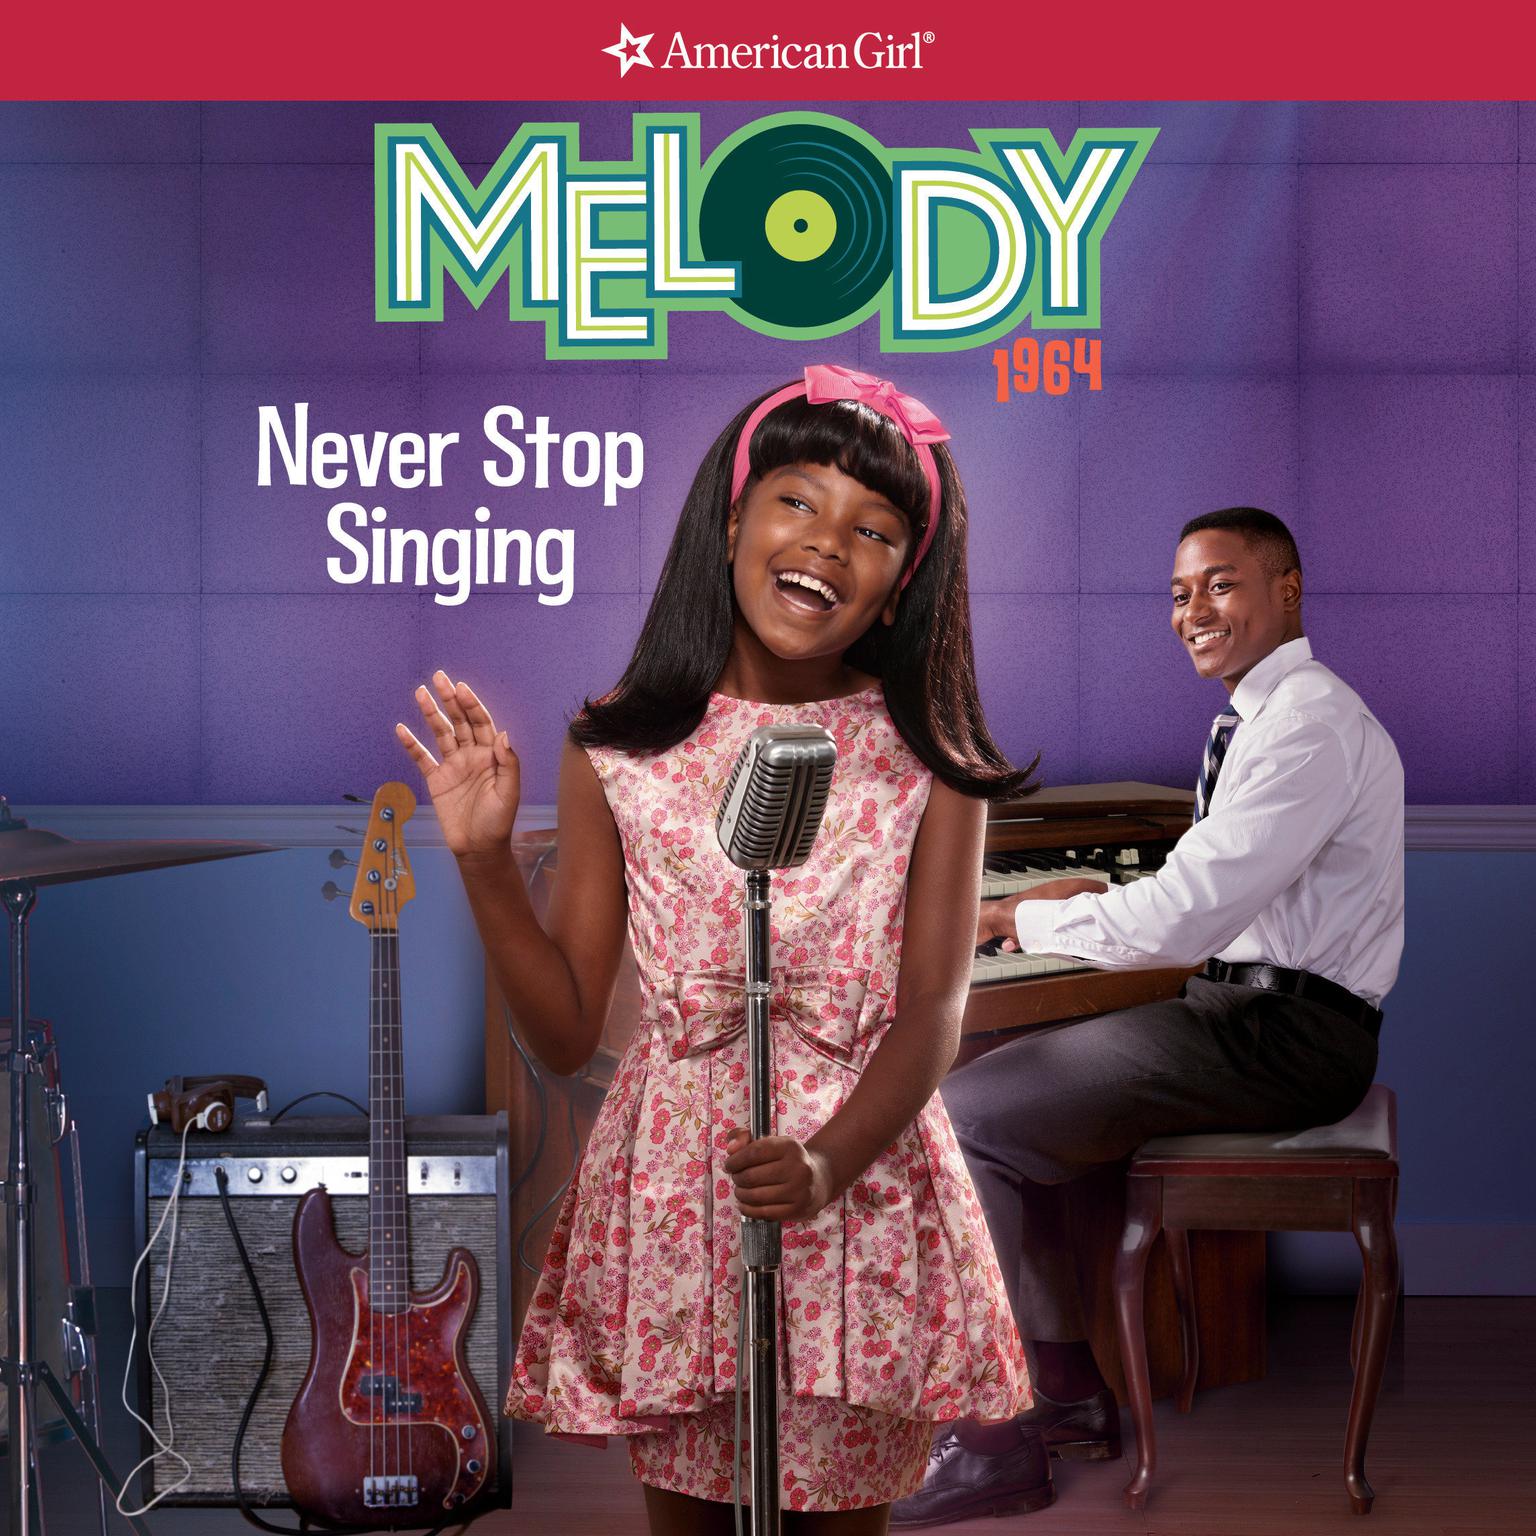 Melody: Never Stop Singing Audiobook, by Denise Lewis Patrick